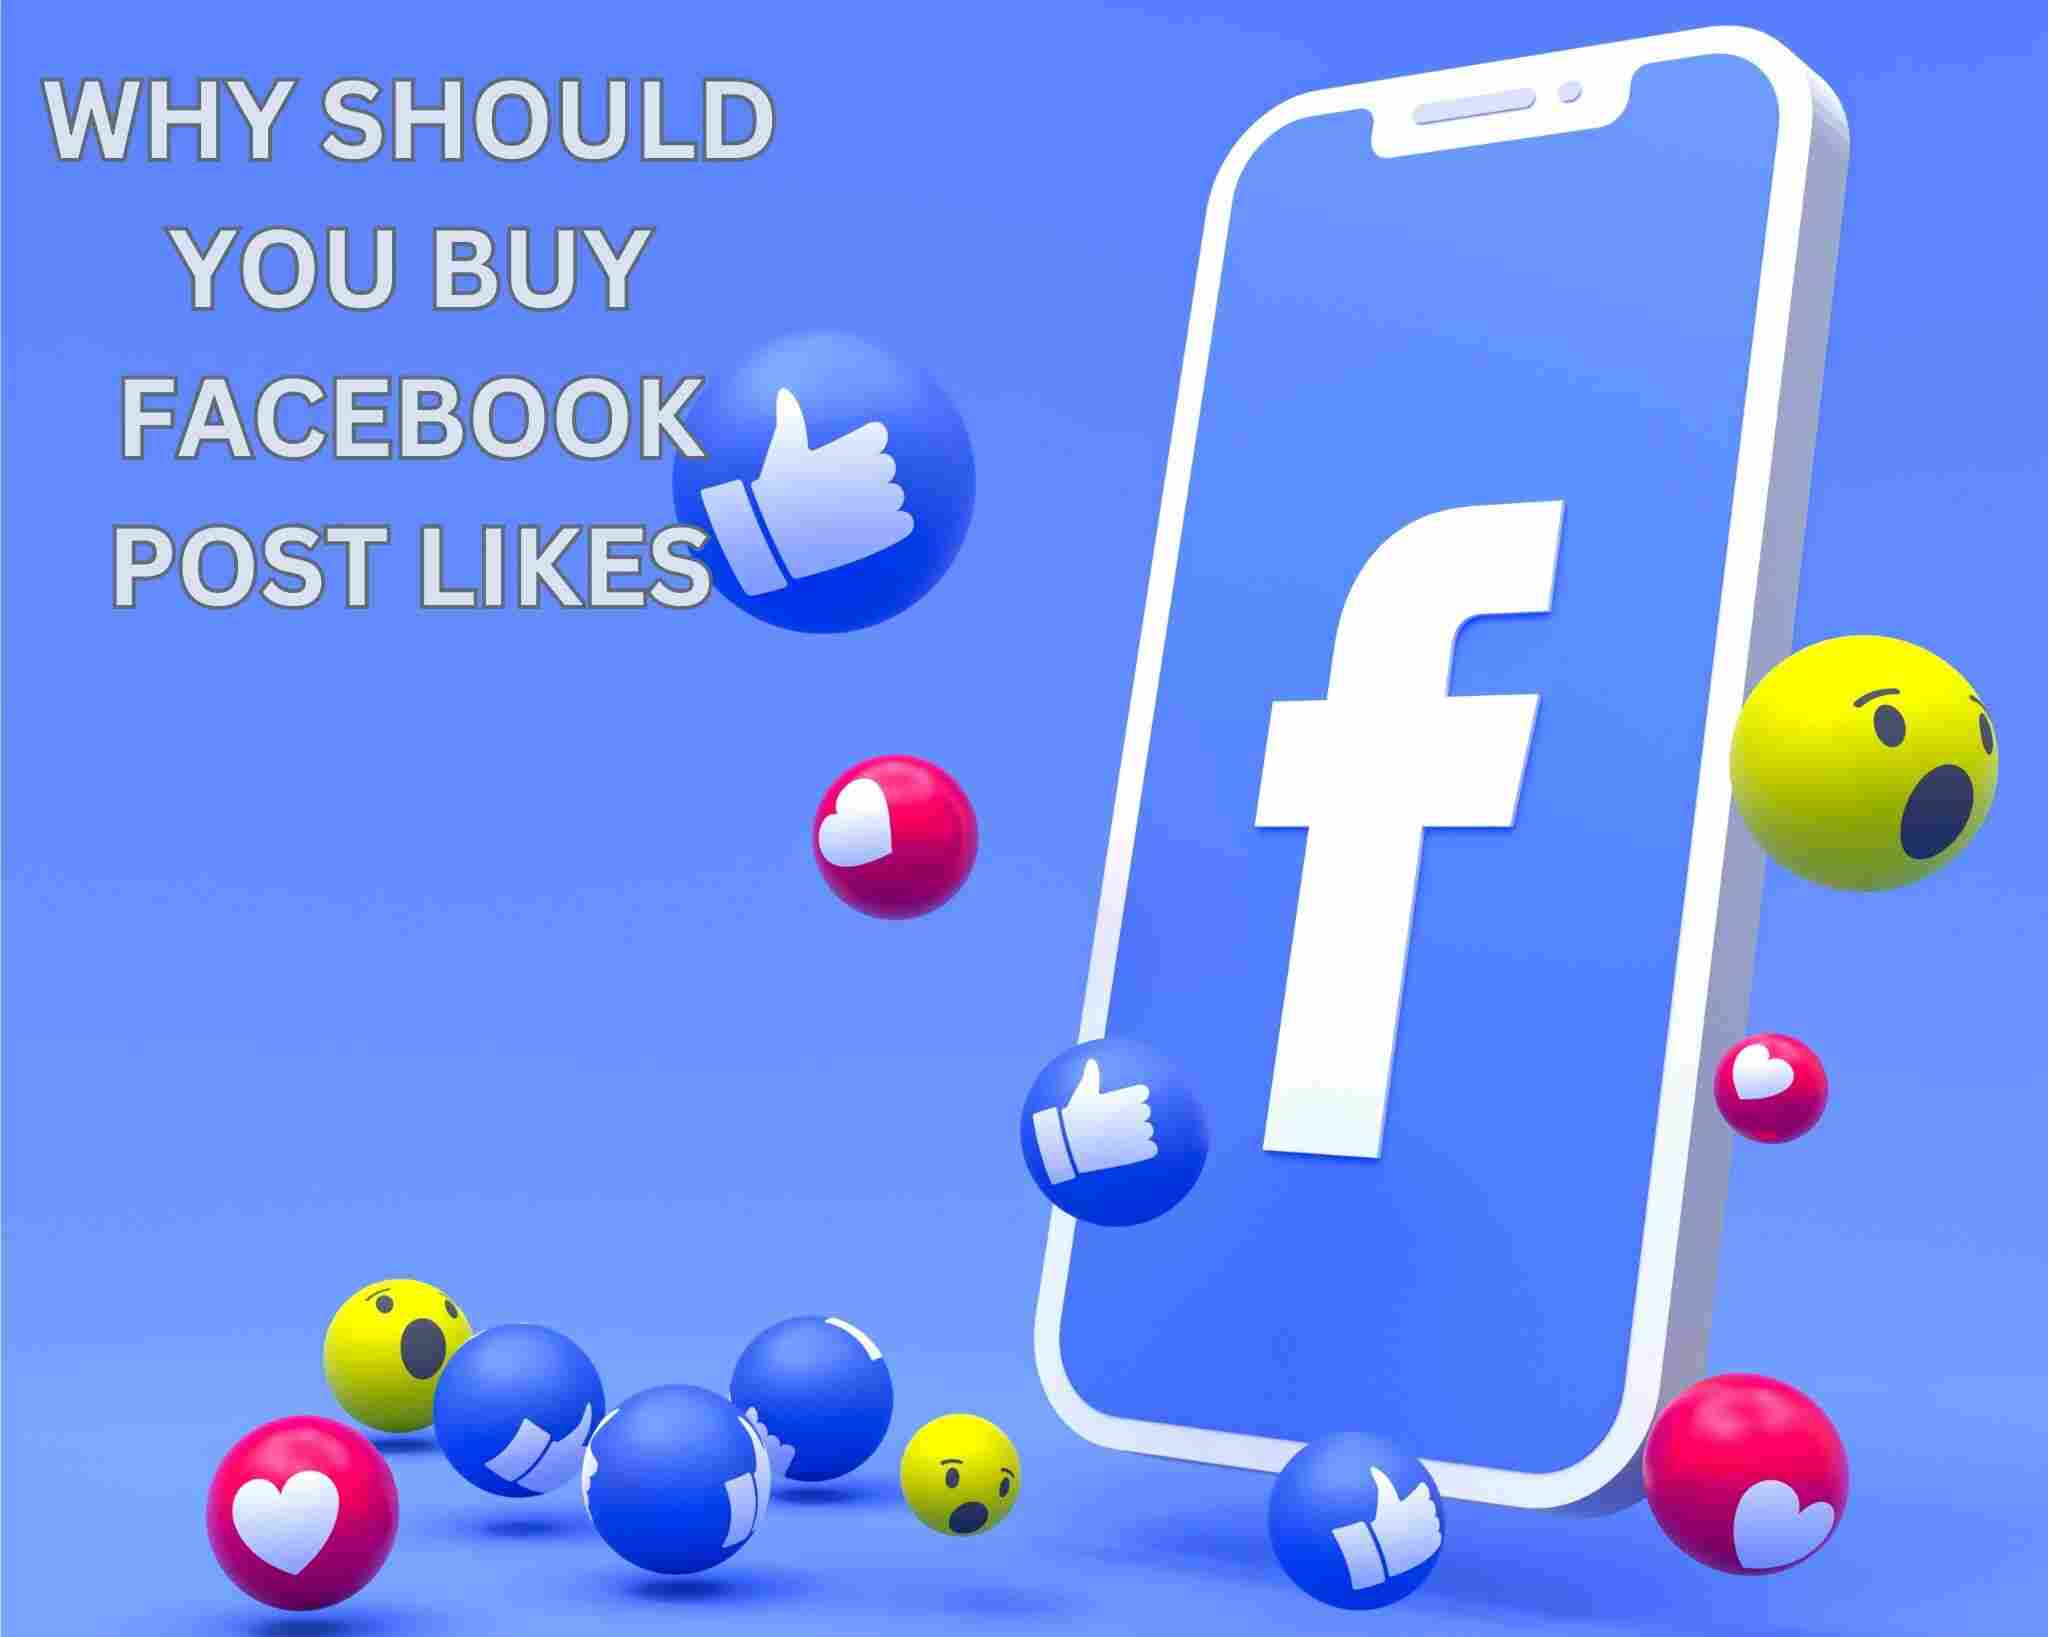 WHY SHOULD YOU BUY FACEBOOK POST LIKES